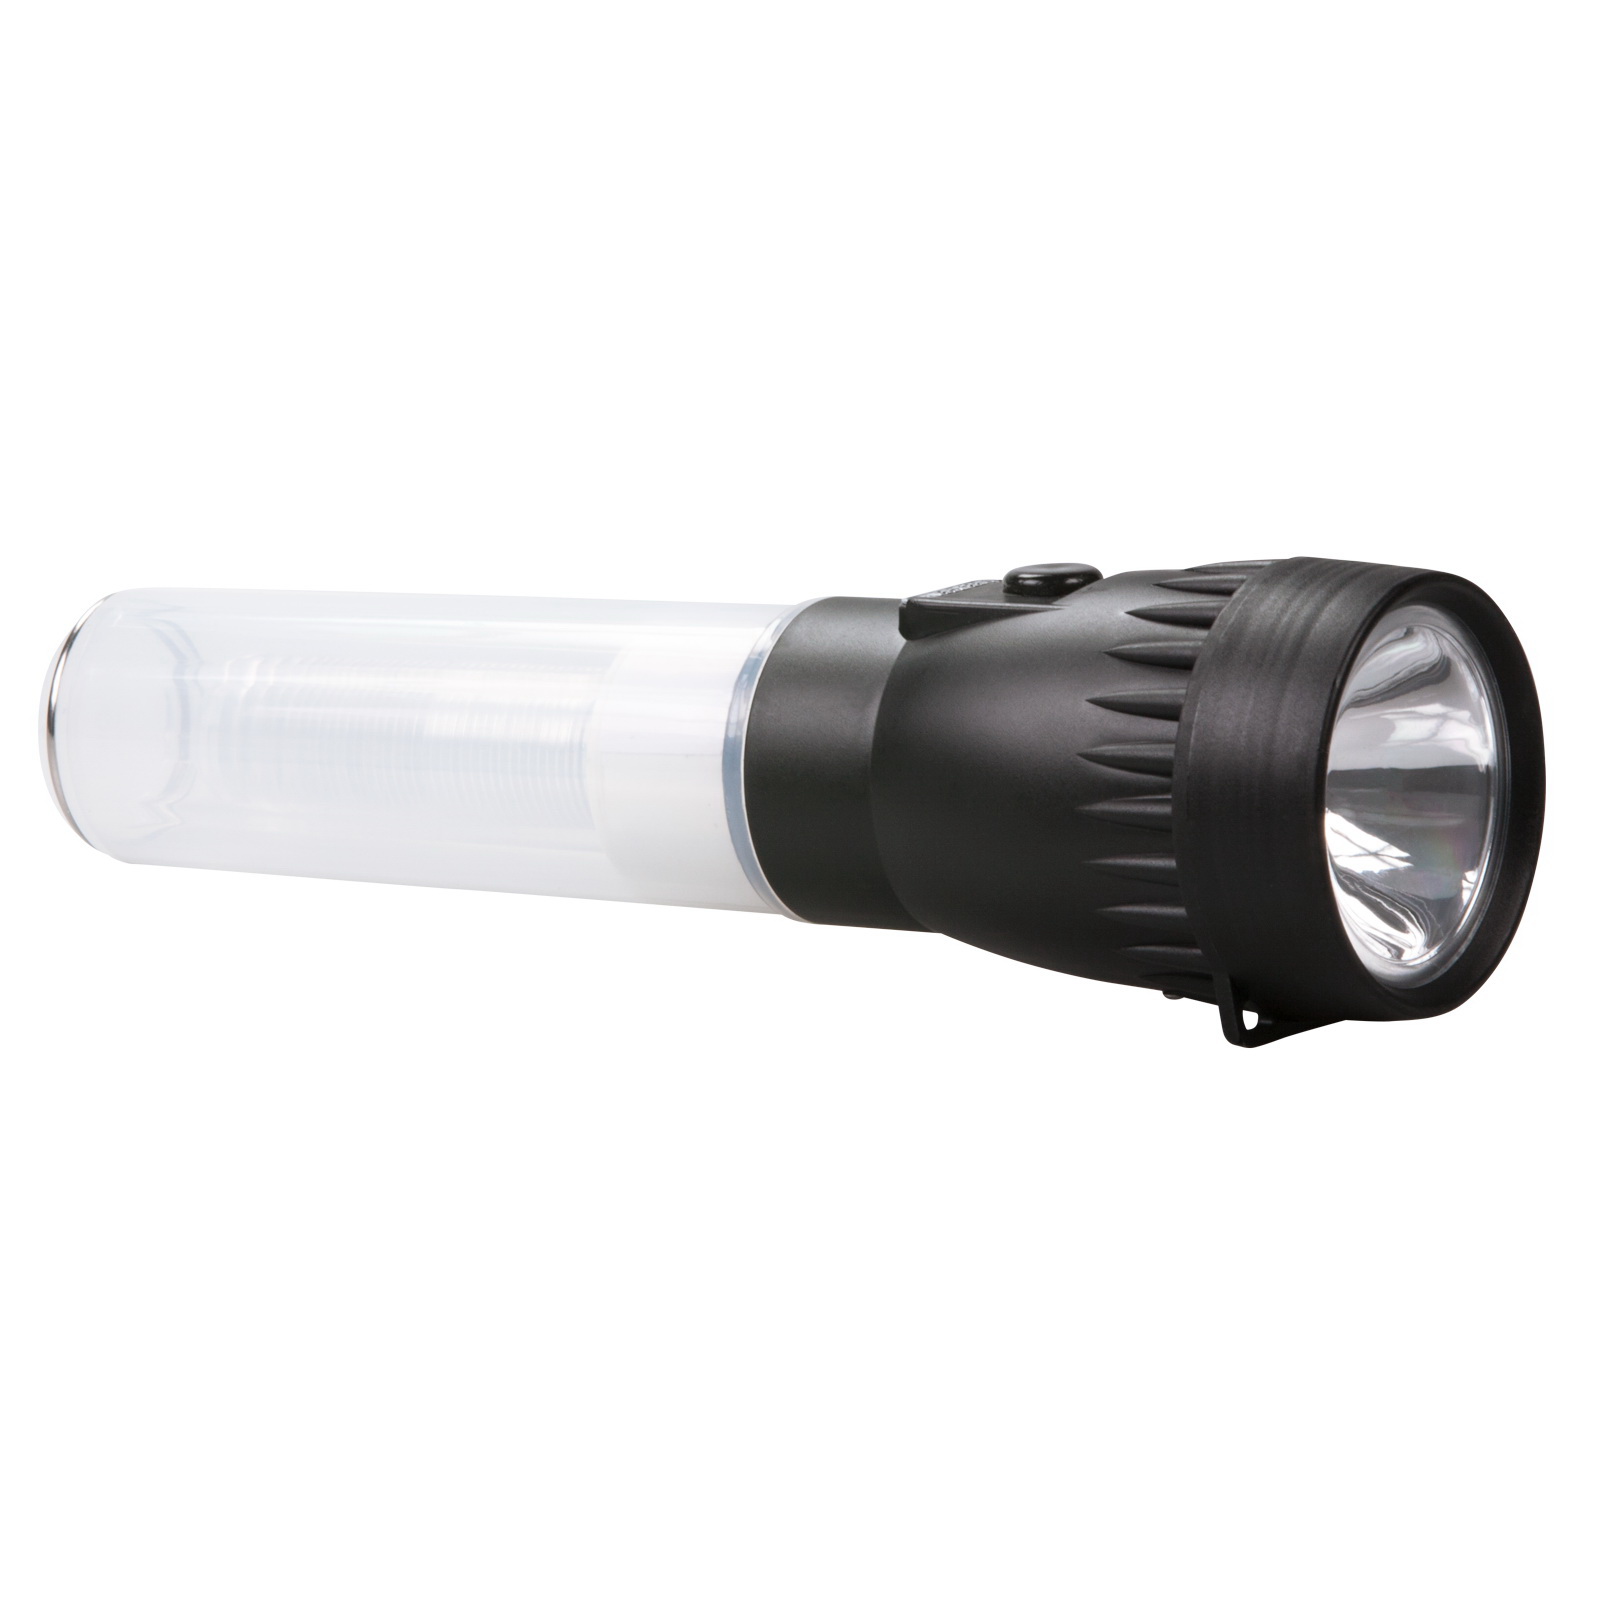 Stormproof Series 41-3744 Floating Flashlight and Lantern, AA Battery, LED Lamp, 20 hr Run Time, Clear